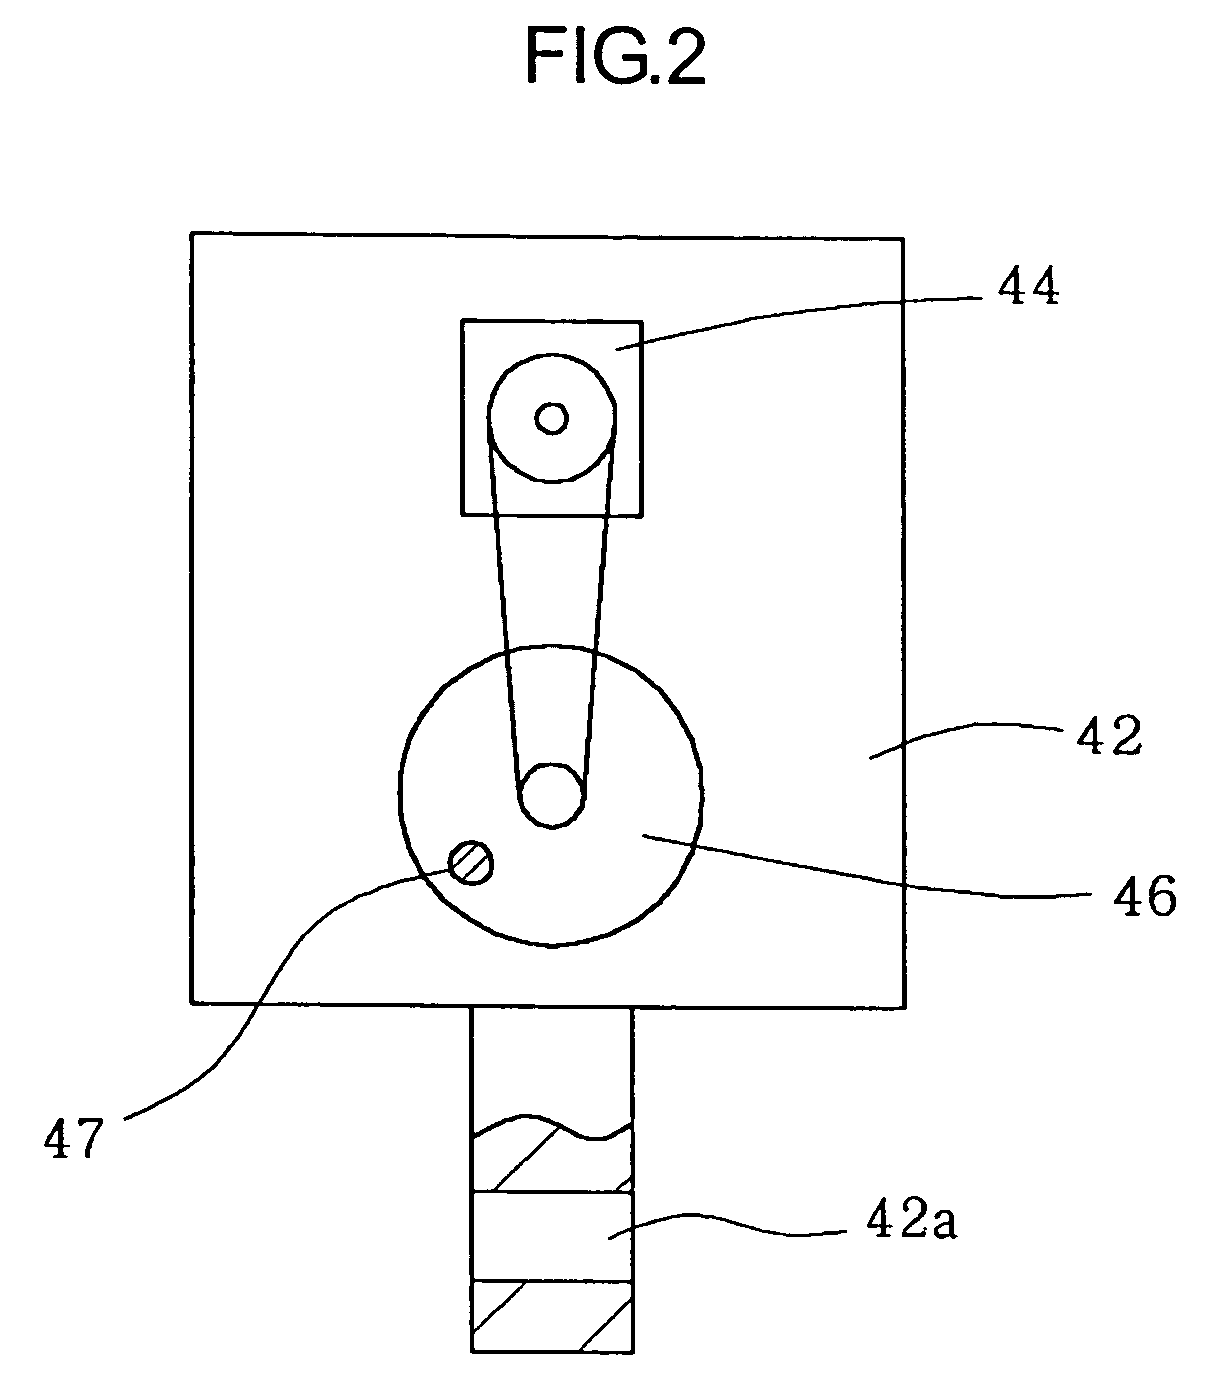 Apparatus for preparing femoral cavity using vibration under operation of fixing guide unit